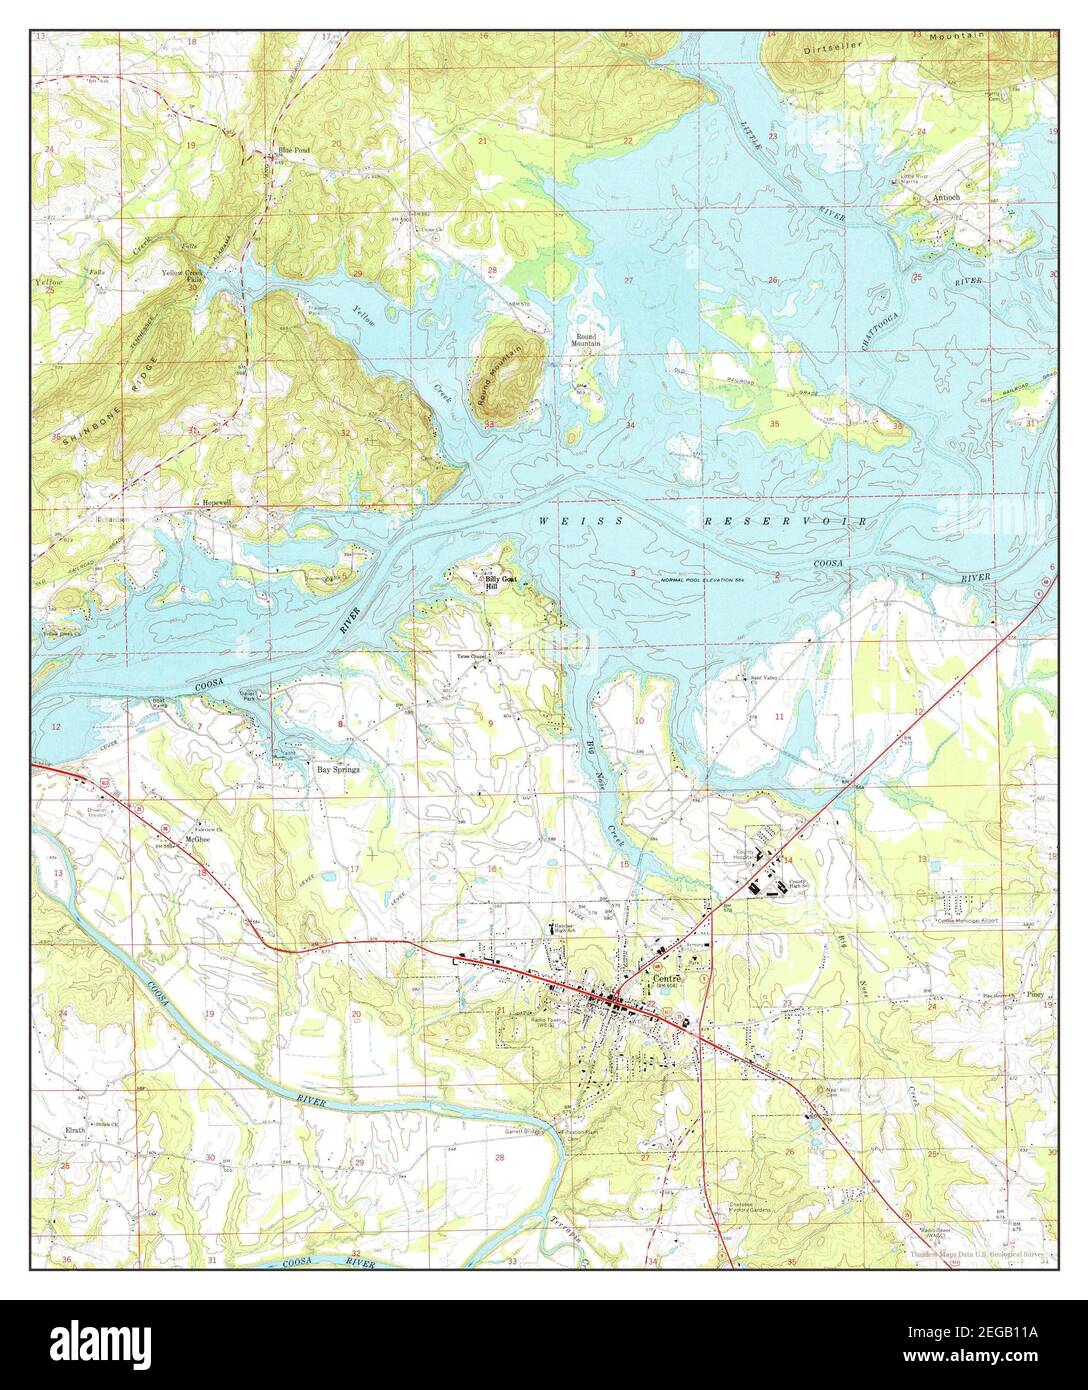 Centre, Alabama, map 1967, 1:24000, United States of America by Timeless Maps, data U.S. Geological Survey Stock Photo